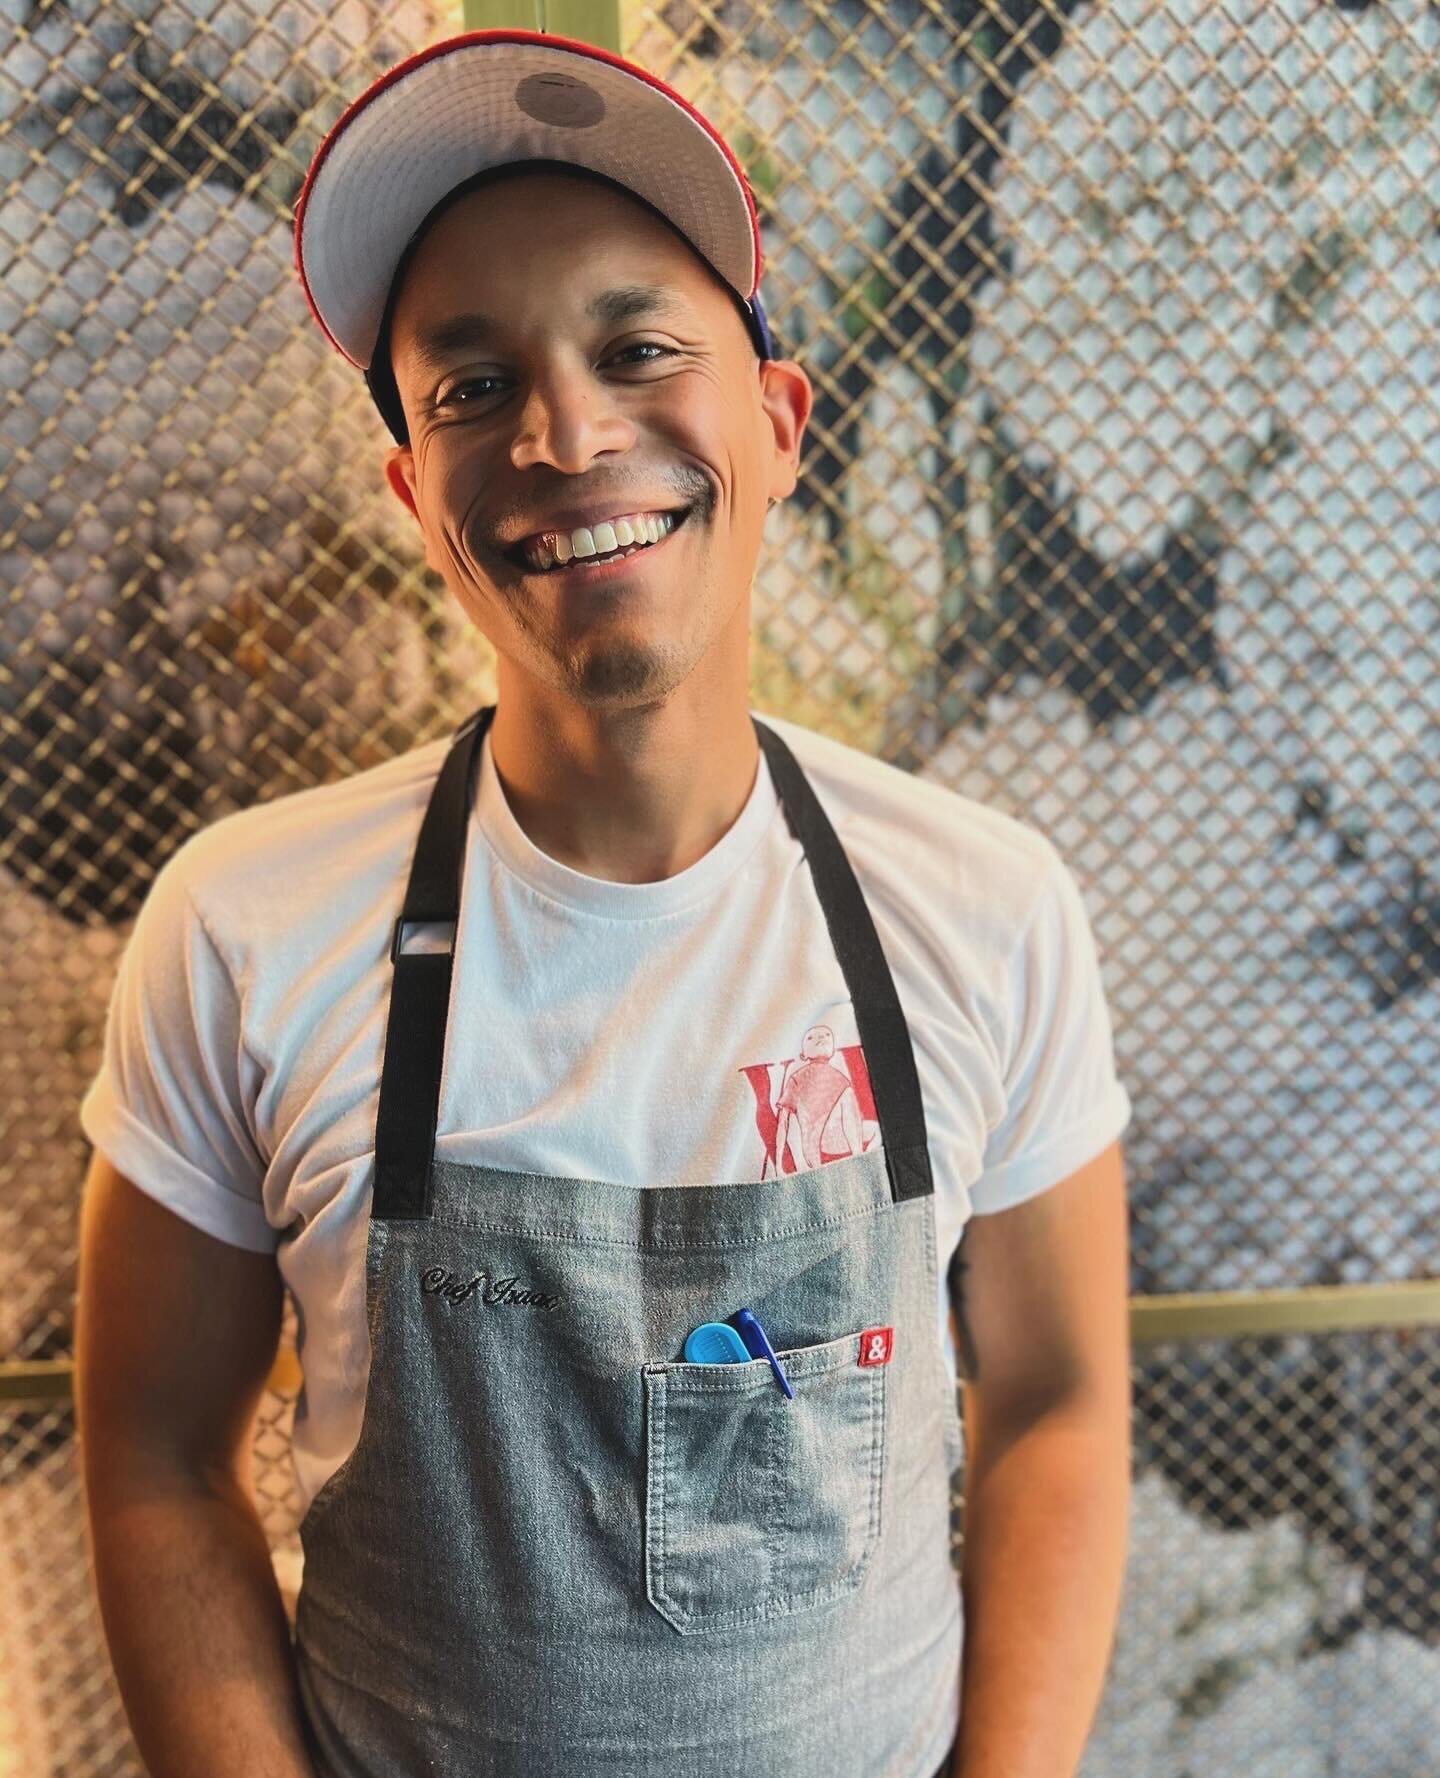 The guy right here... @plantainsupernova_  well, he's got some seriously good Dominican food coming your way today in what will be the first of many #Dominicannights coming to our little wine shack. He's bringing these creations to your plate every 4